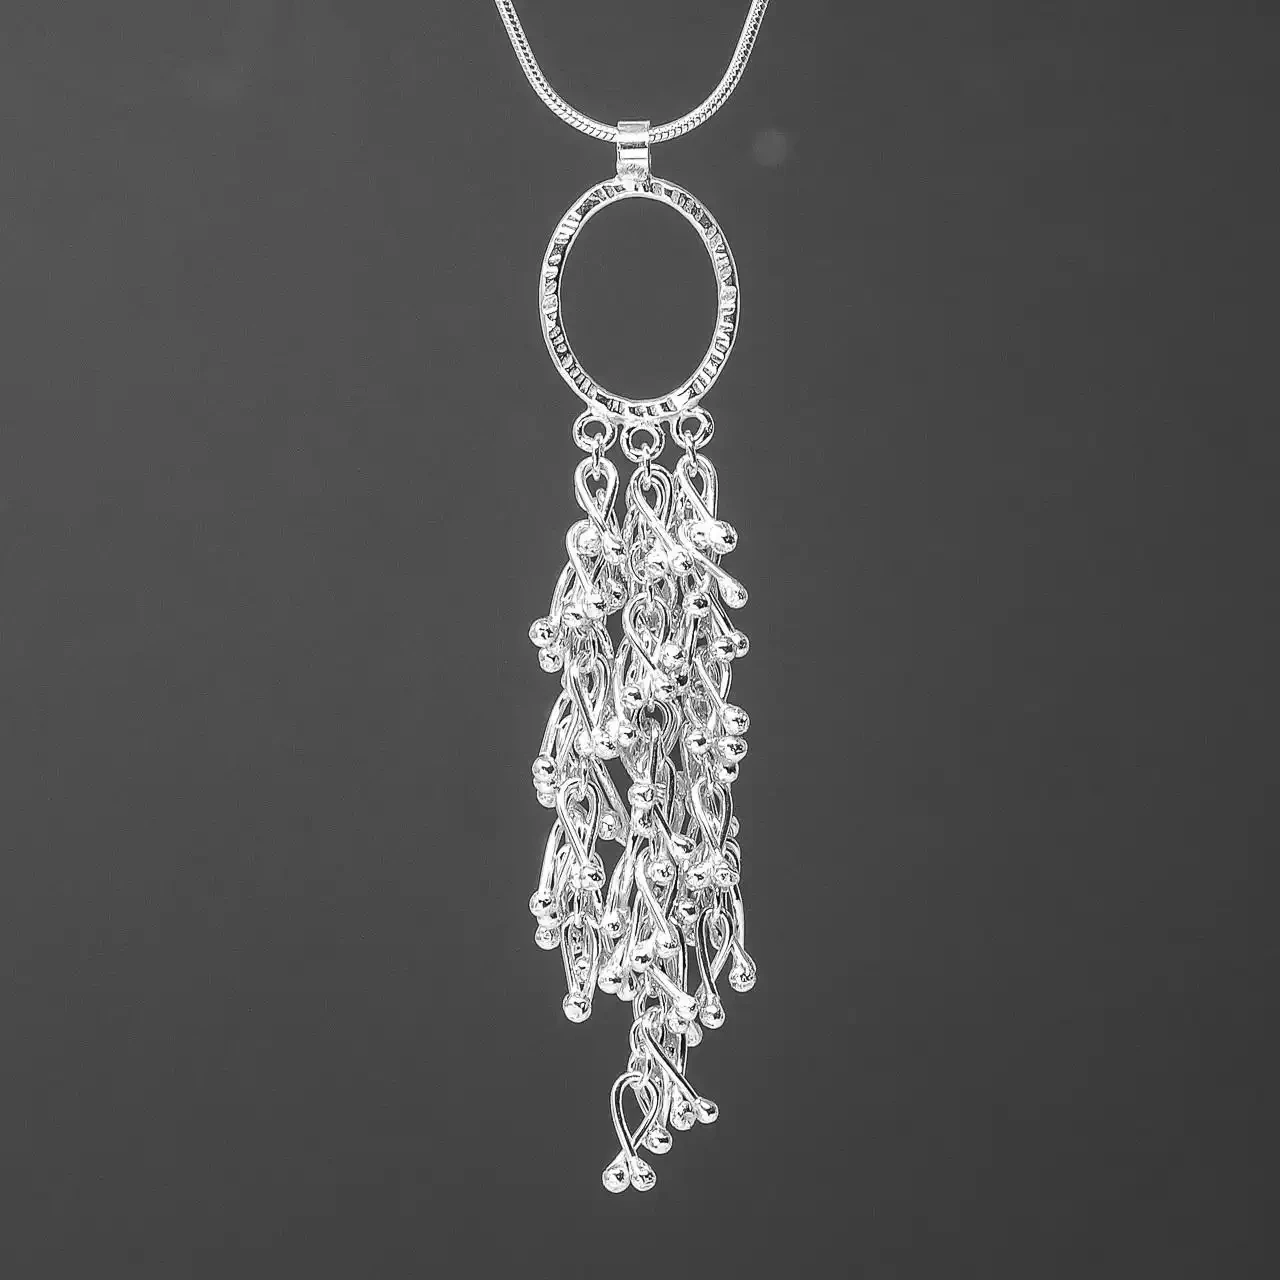 Droplets and Oval Silver Pendant - Large by Tara Kirkpatrick